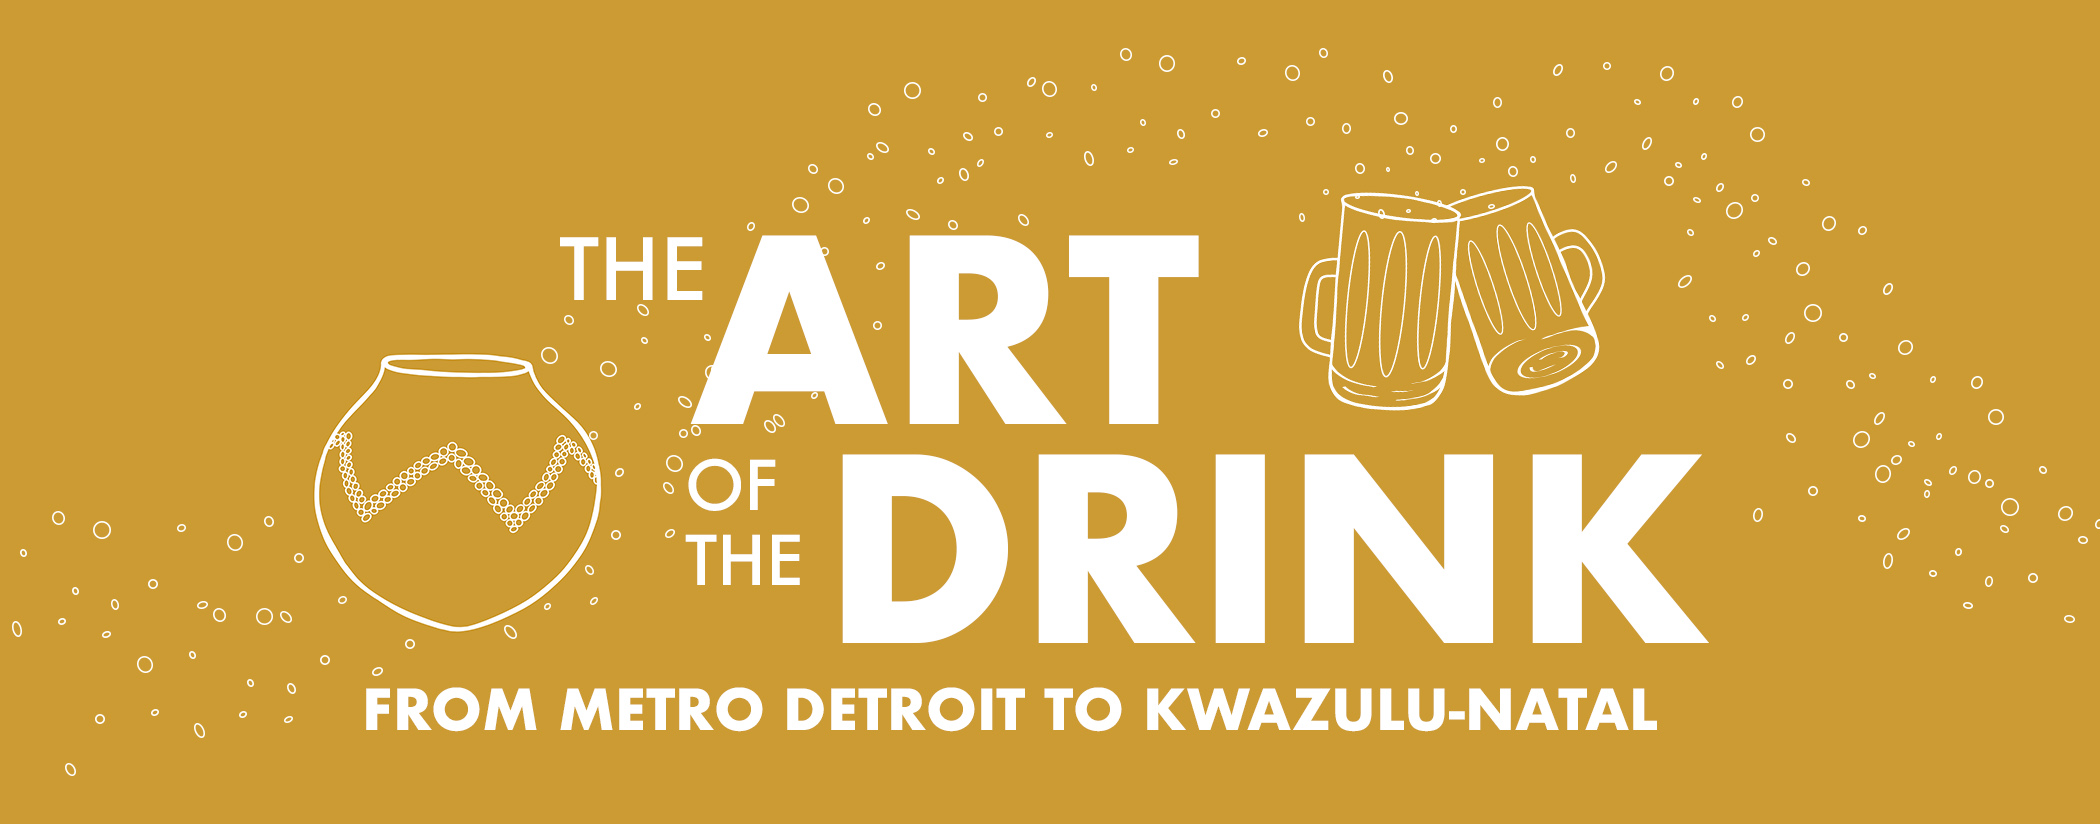 The Art of the Drink: From Metro Detroit to KwaZulu-Natal. Featuring a vase, beer cups and bubbles